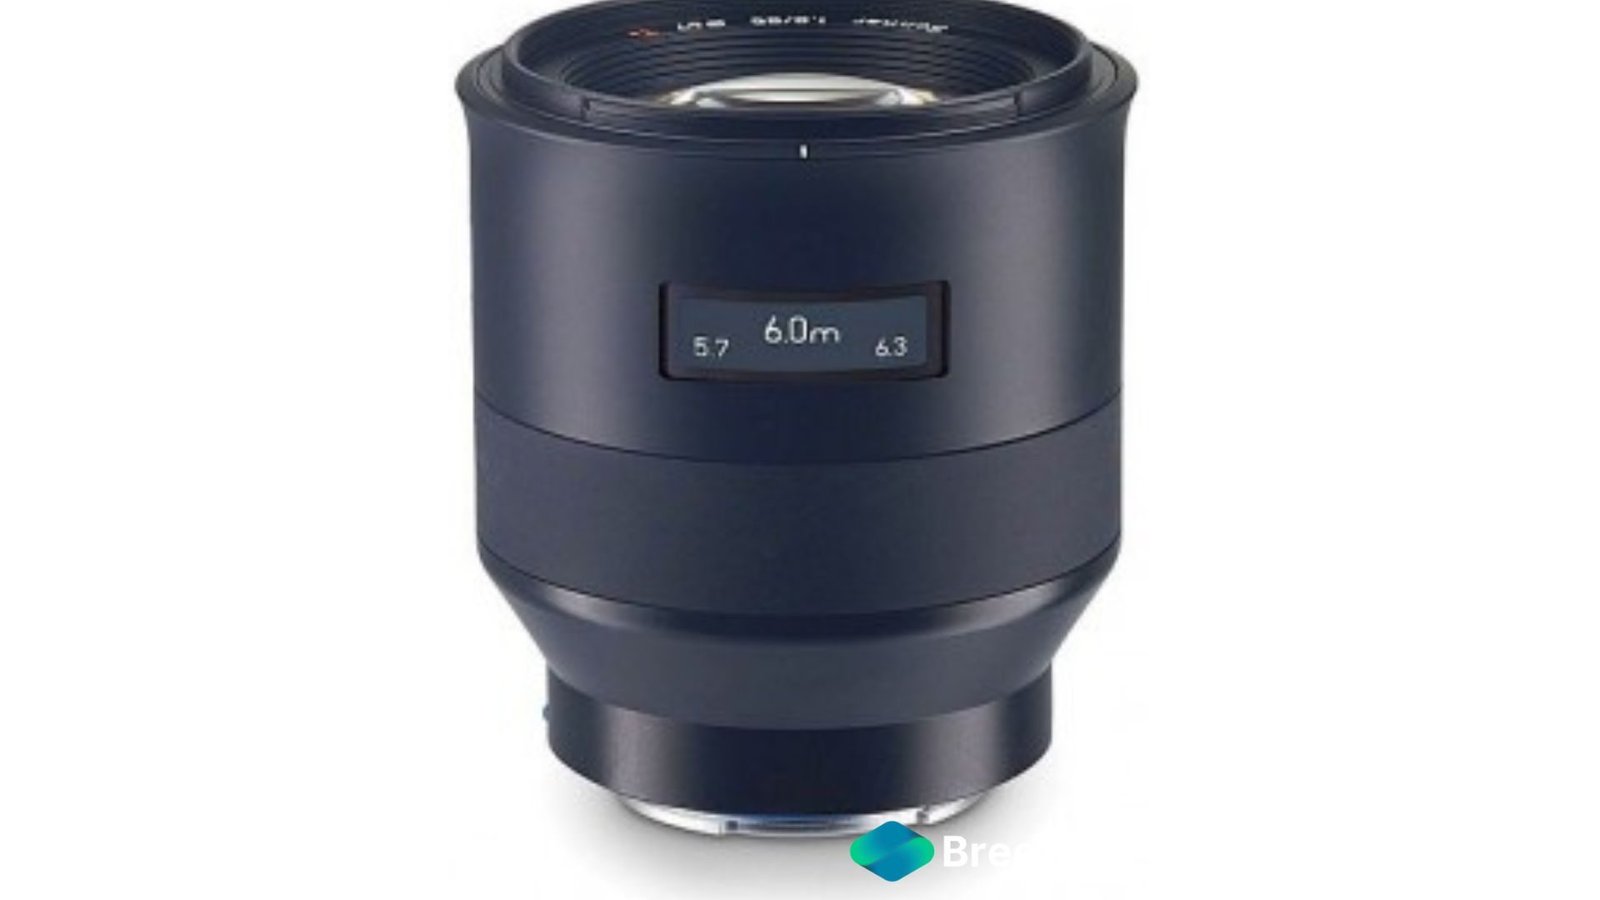 Rent ZEISS Batis Lens for Sony E Mount 1.8/85 in Delhi NCR, Camera, Camera lenses for rent, Camera accessories, in Delhi Gurgaon Noida, hire Shooting equipment, Lighting equipment rental, Film gear rental for Video production, camera rental company in Delhi, film equipment rental company